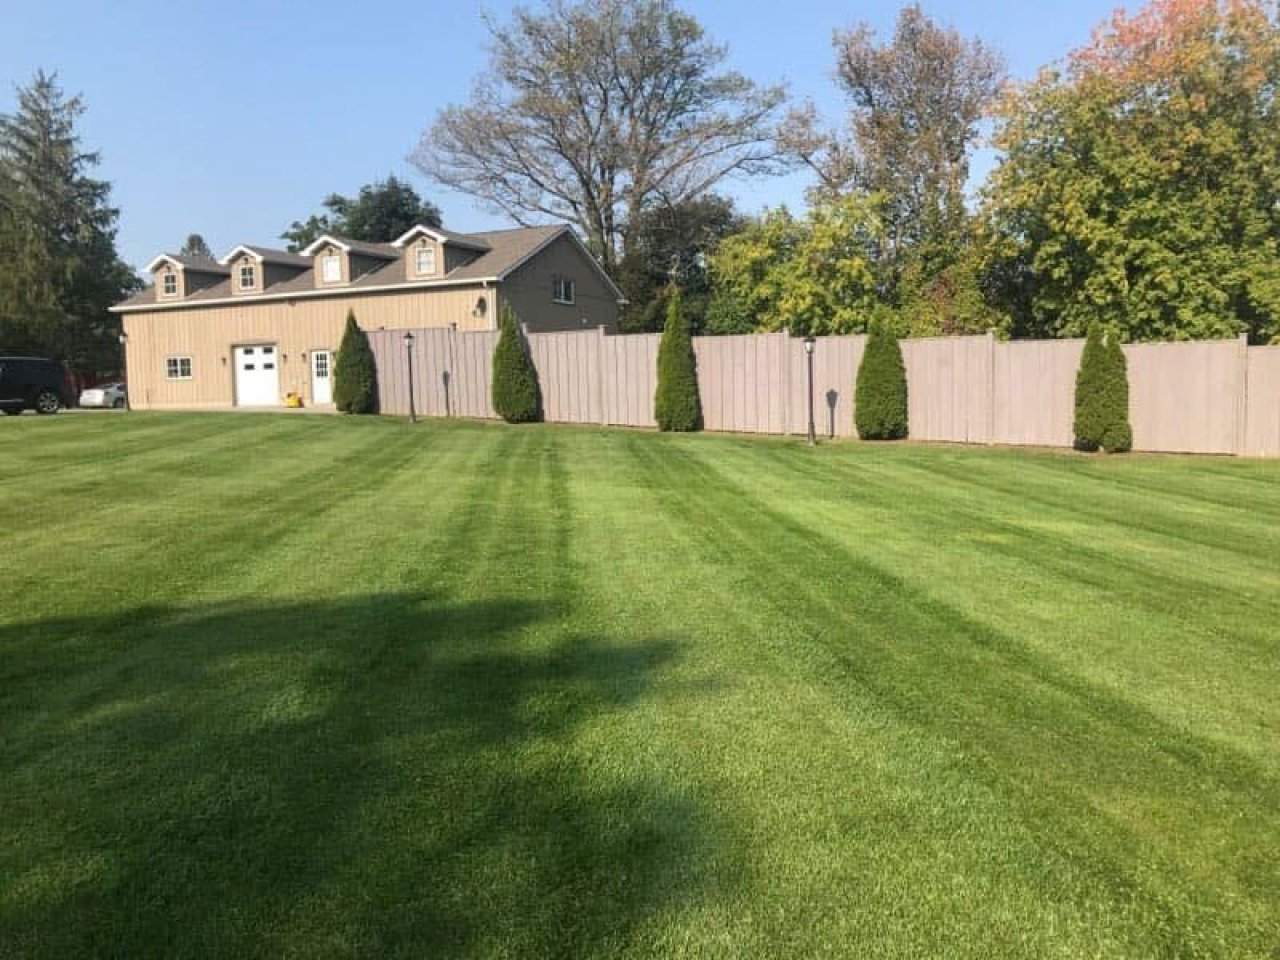 Commercial expansive freshly mowed lawn